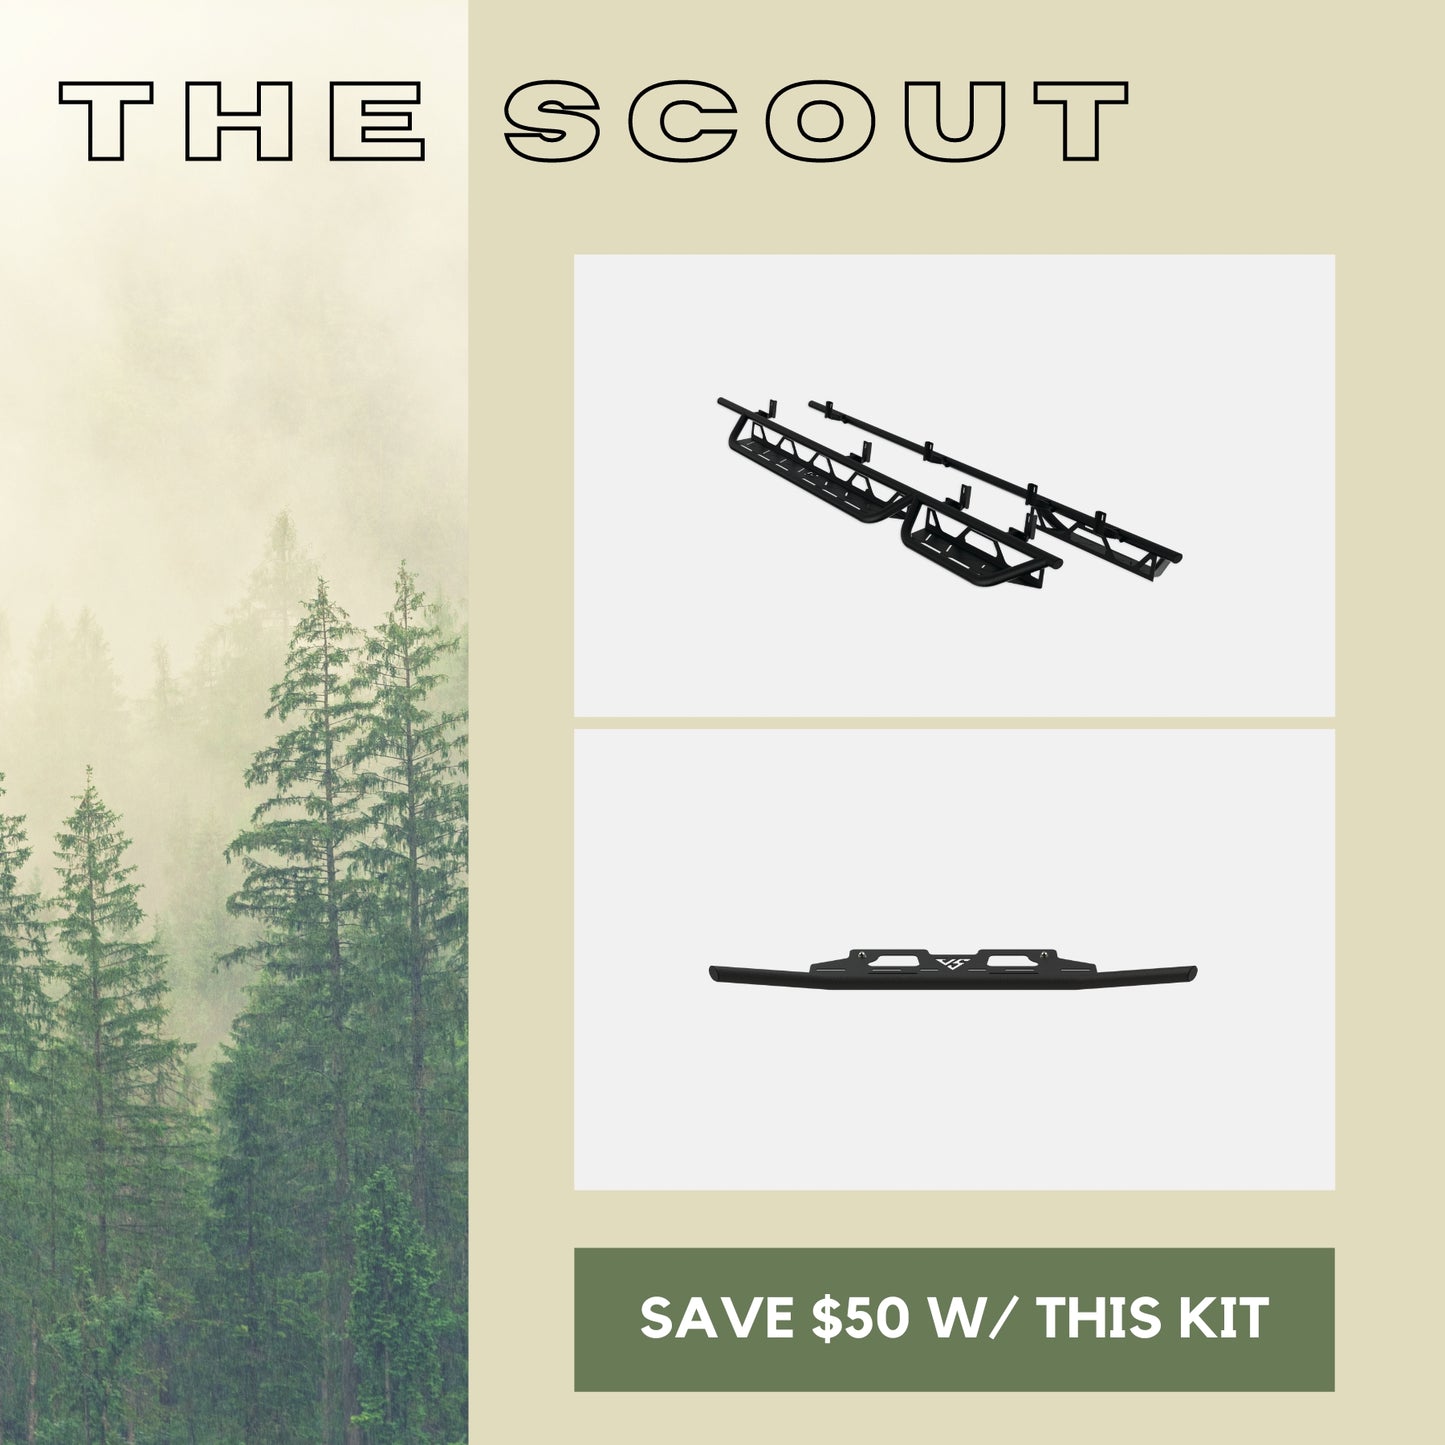 THE SCOUT KIT